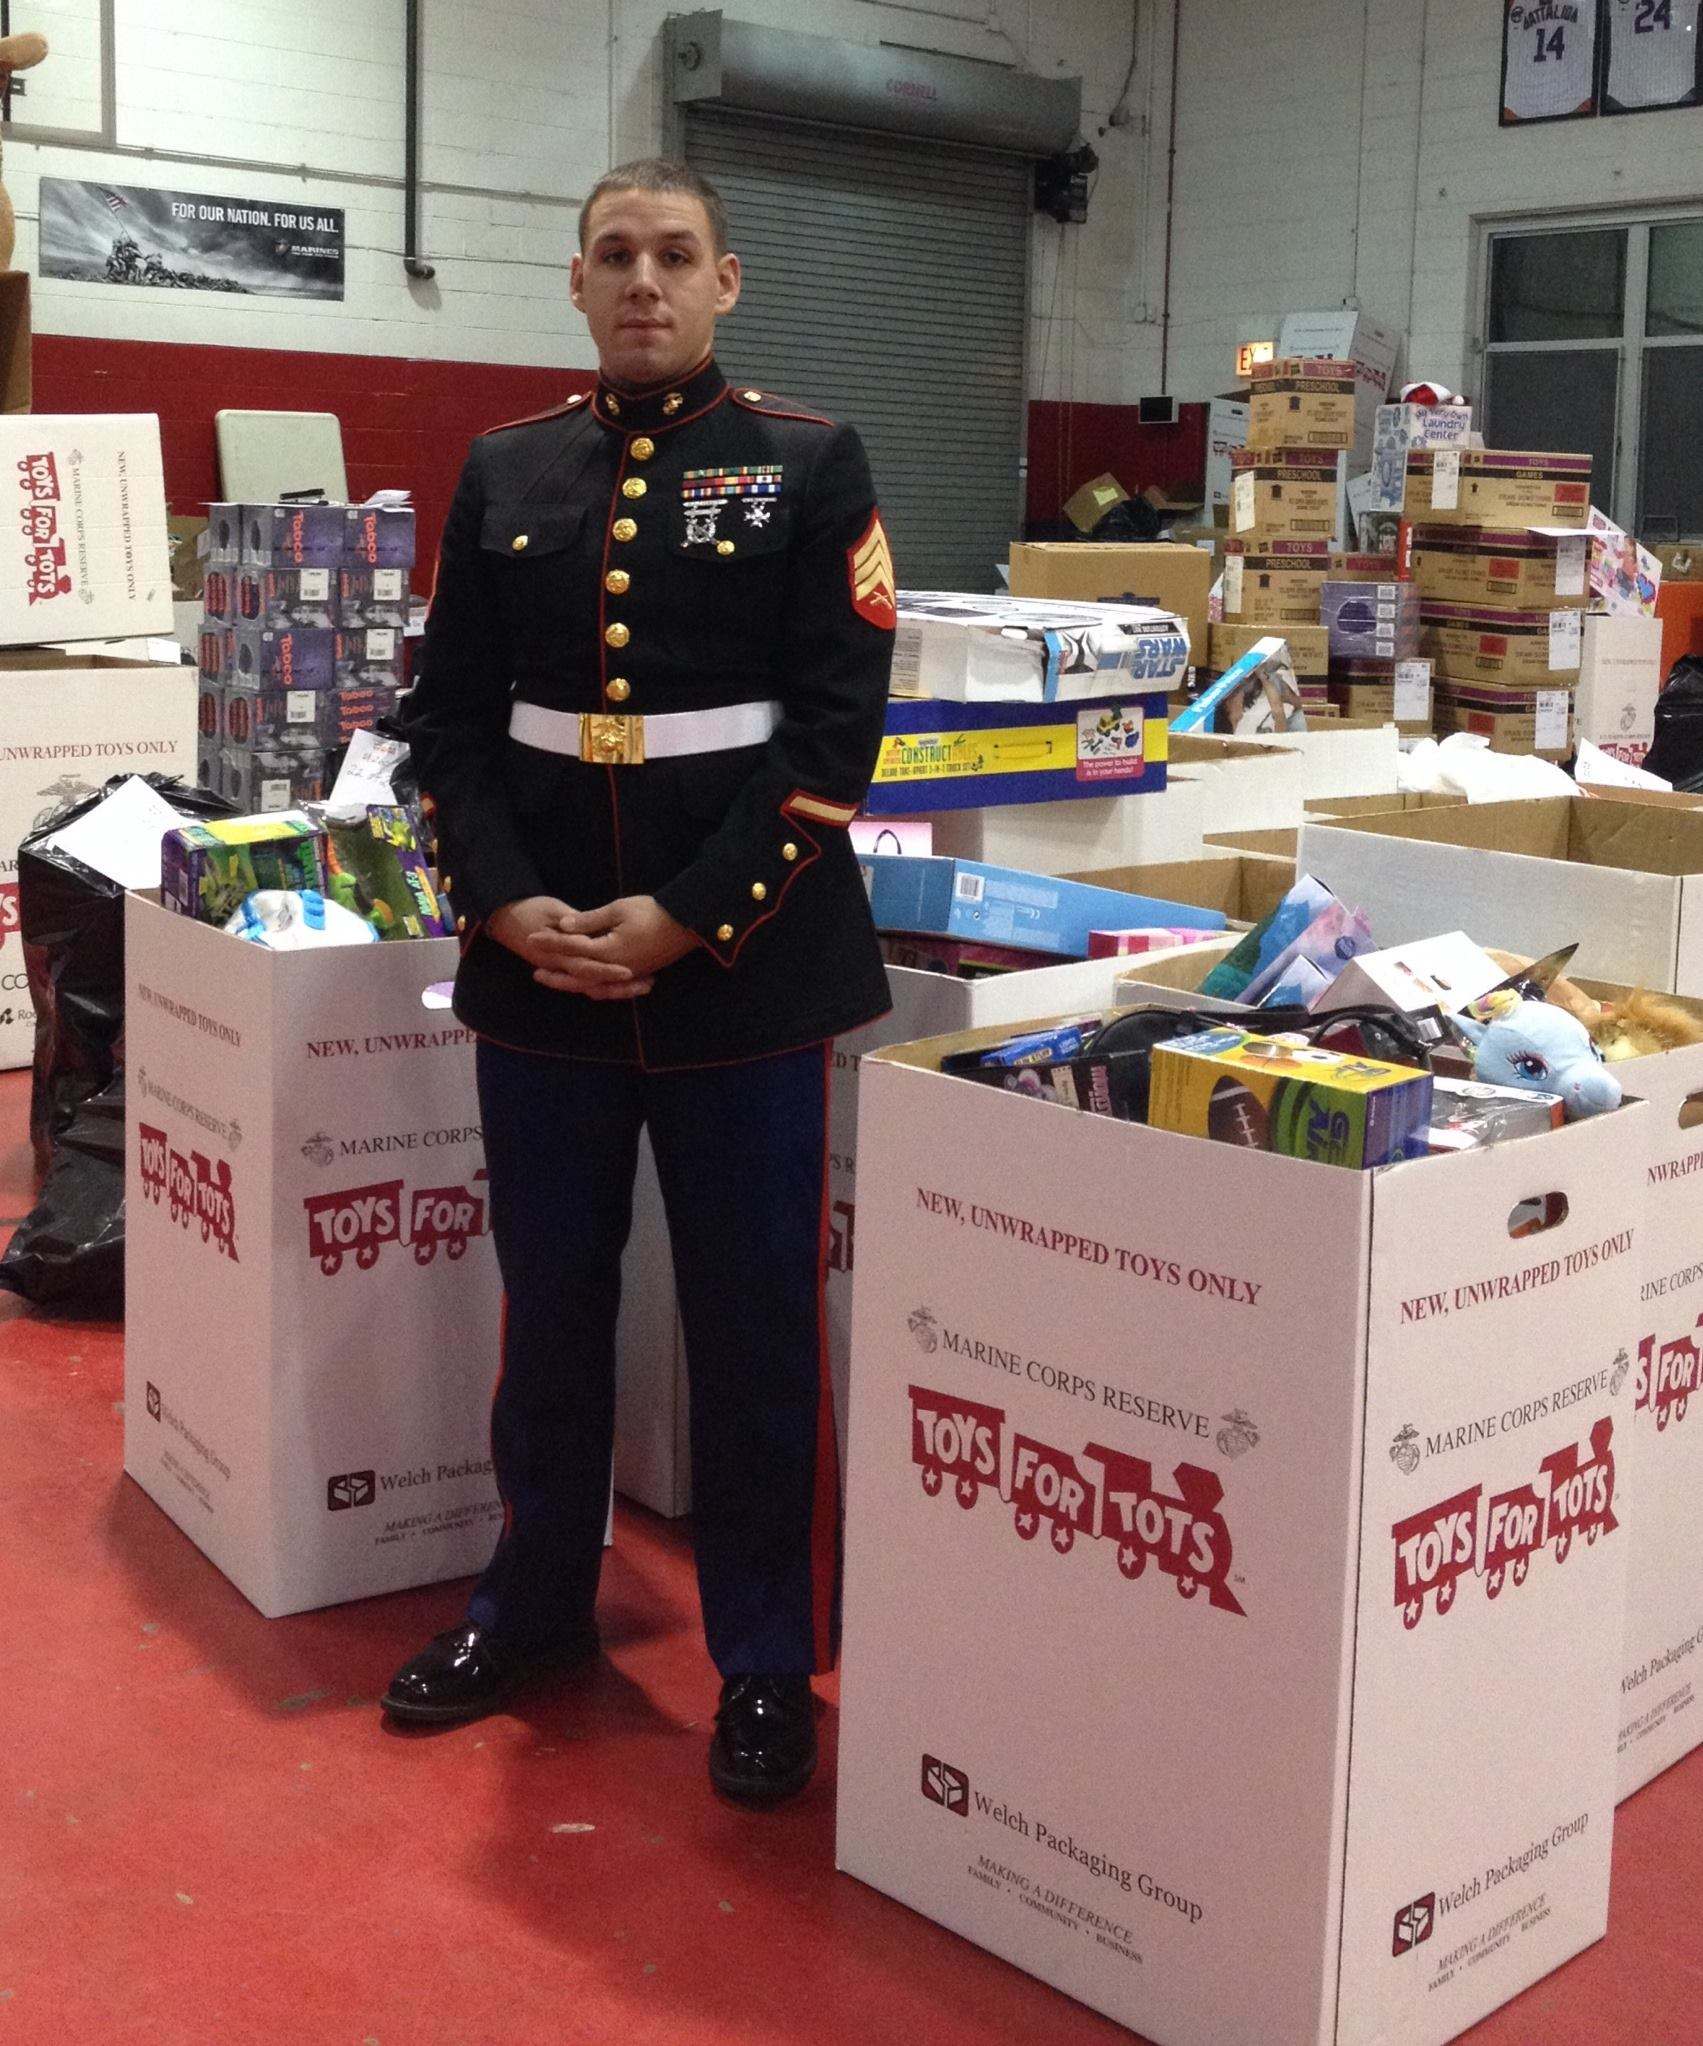 A special thanks to the members of the Marine Corps for helping with the Toys for Tots drive, and their service to our country.